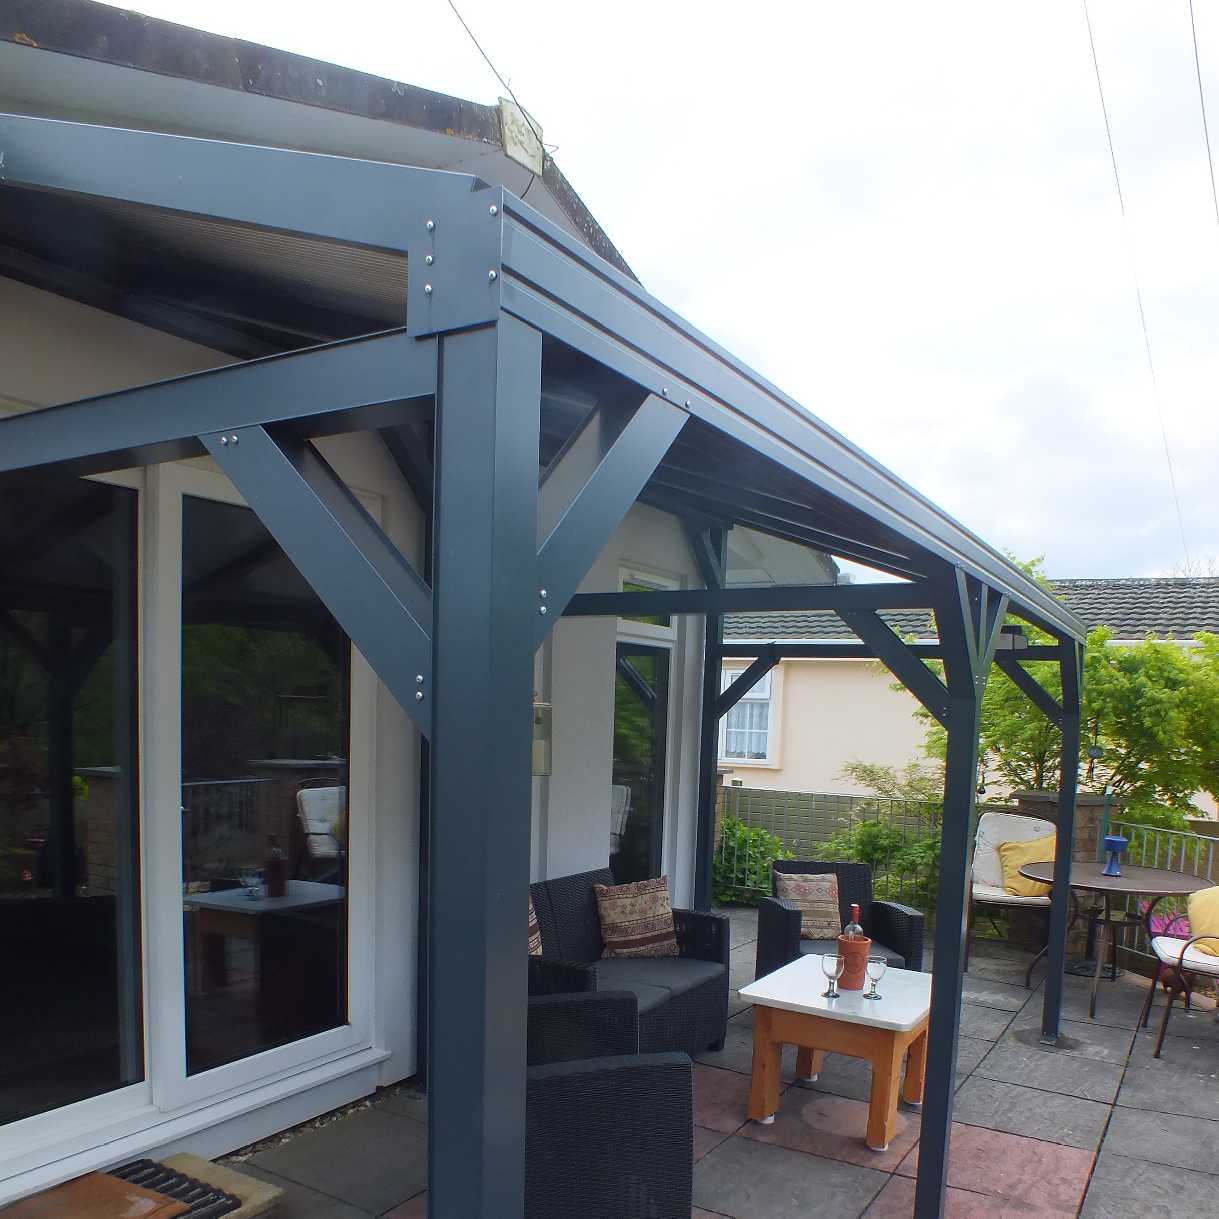 Affordable Omega Smart Free-Standing, Anthracite Grey MonoPitch Roof Canopy with 16mm Polycarbonate Glazing - 3.5m (W) x 3.5m (P), (6) Supporting Posts